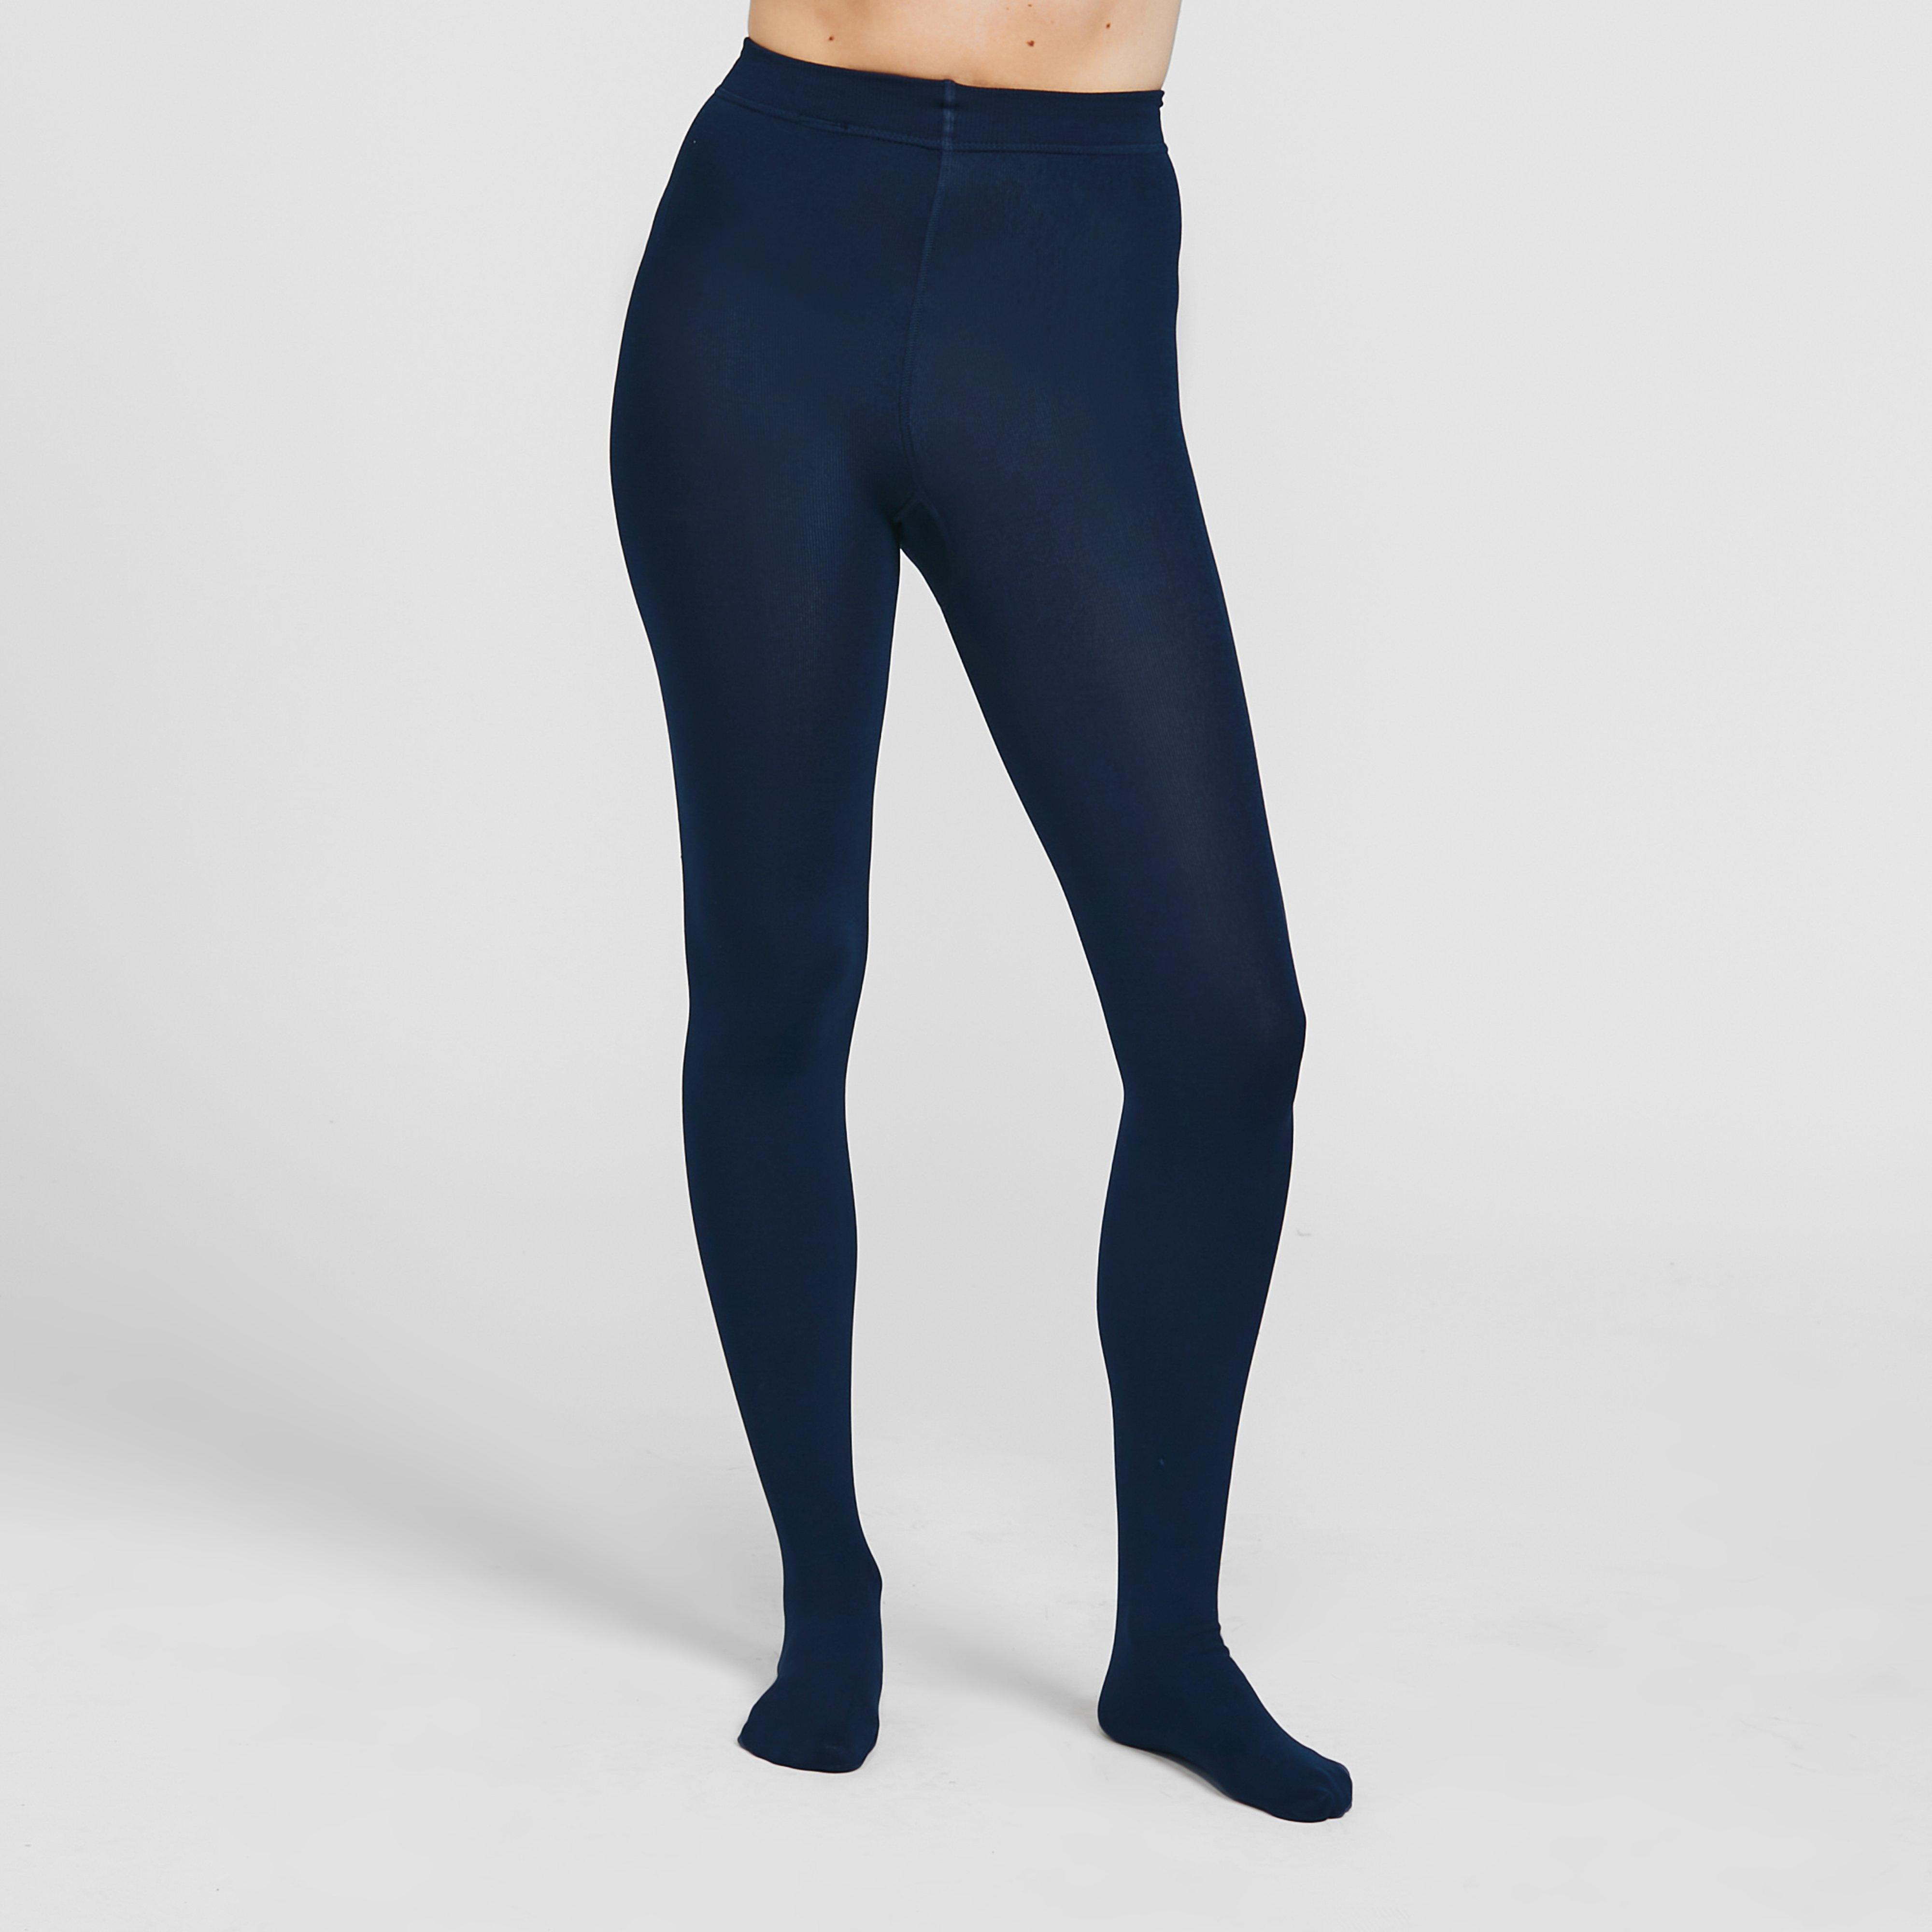 Heat Holders Women's Thermal Tights, Navy